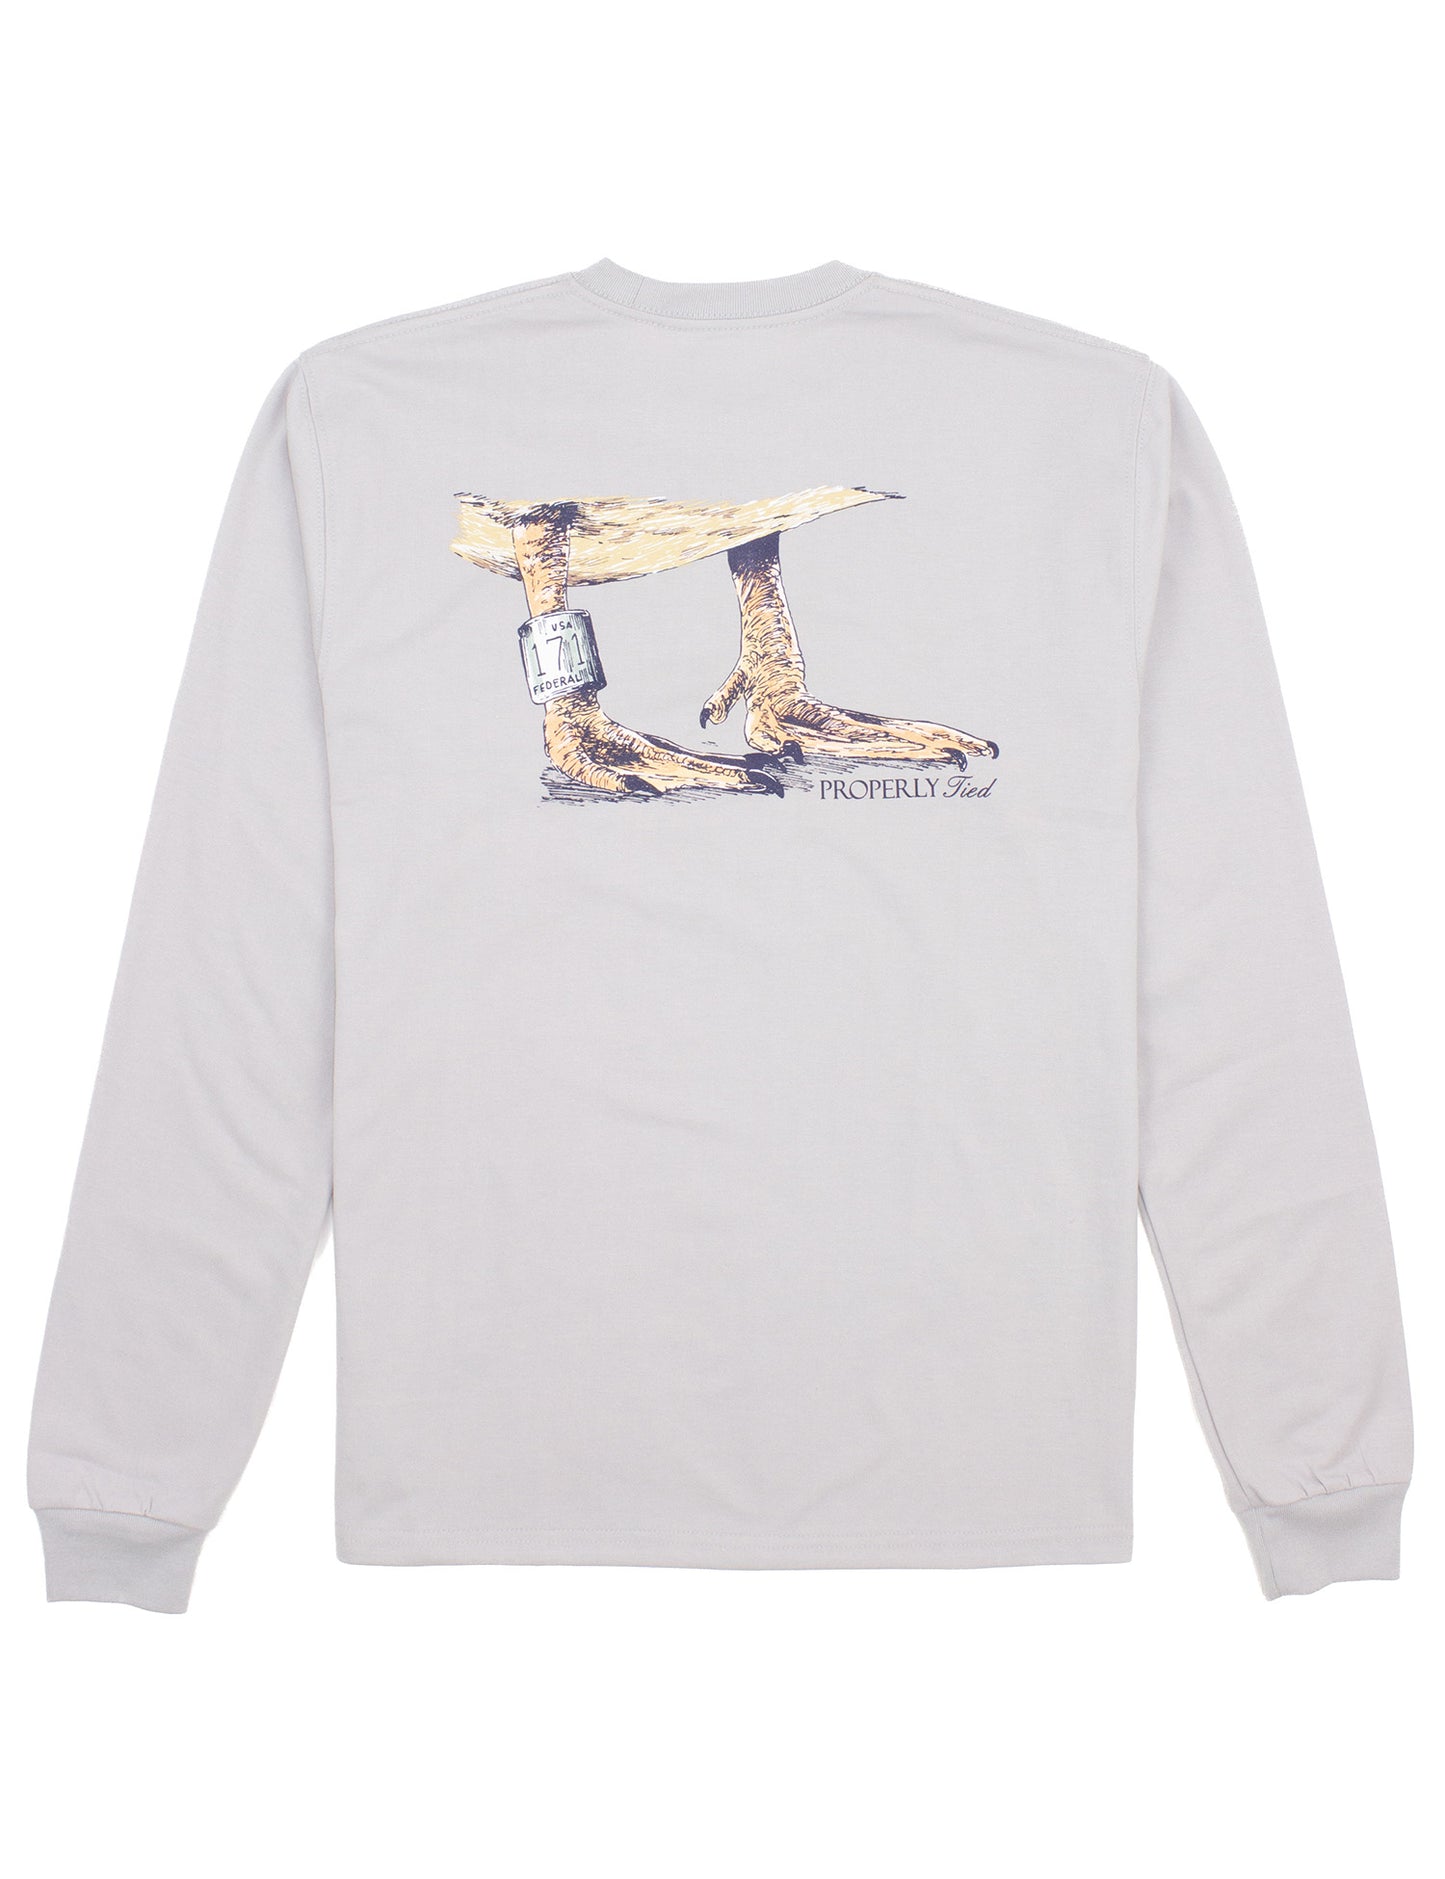 Duck Band Long Sleeve Tee  - Doodlebug's Children's Boutique